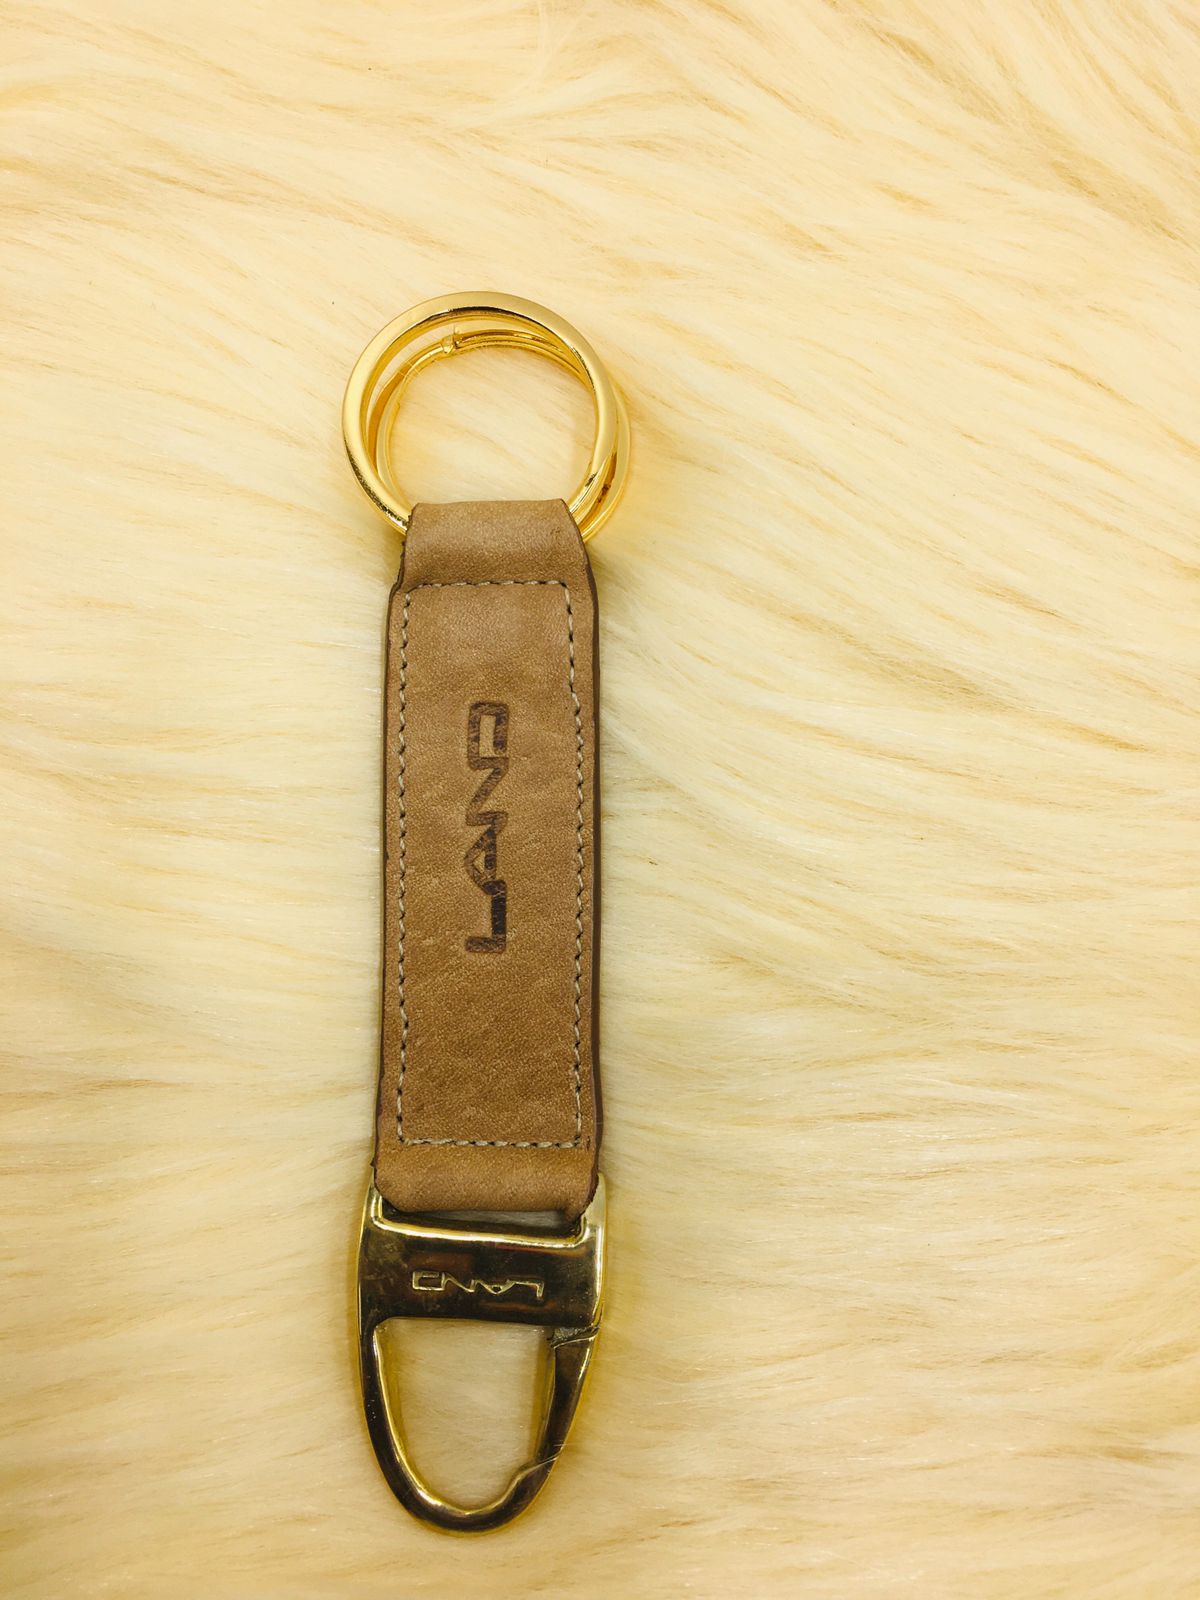 LIMITED KEY RING